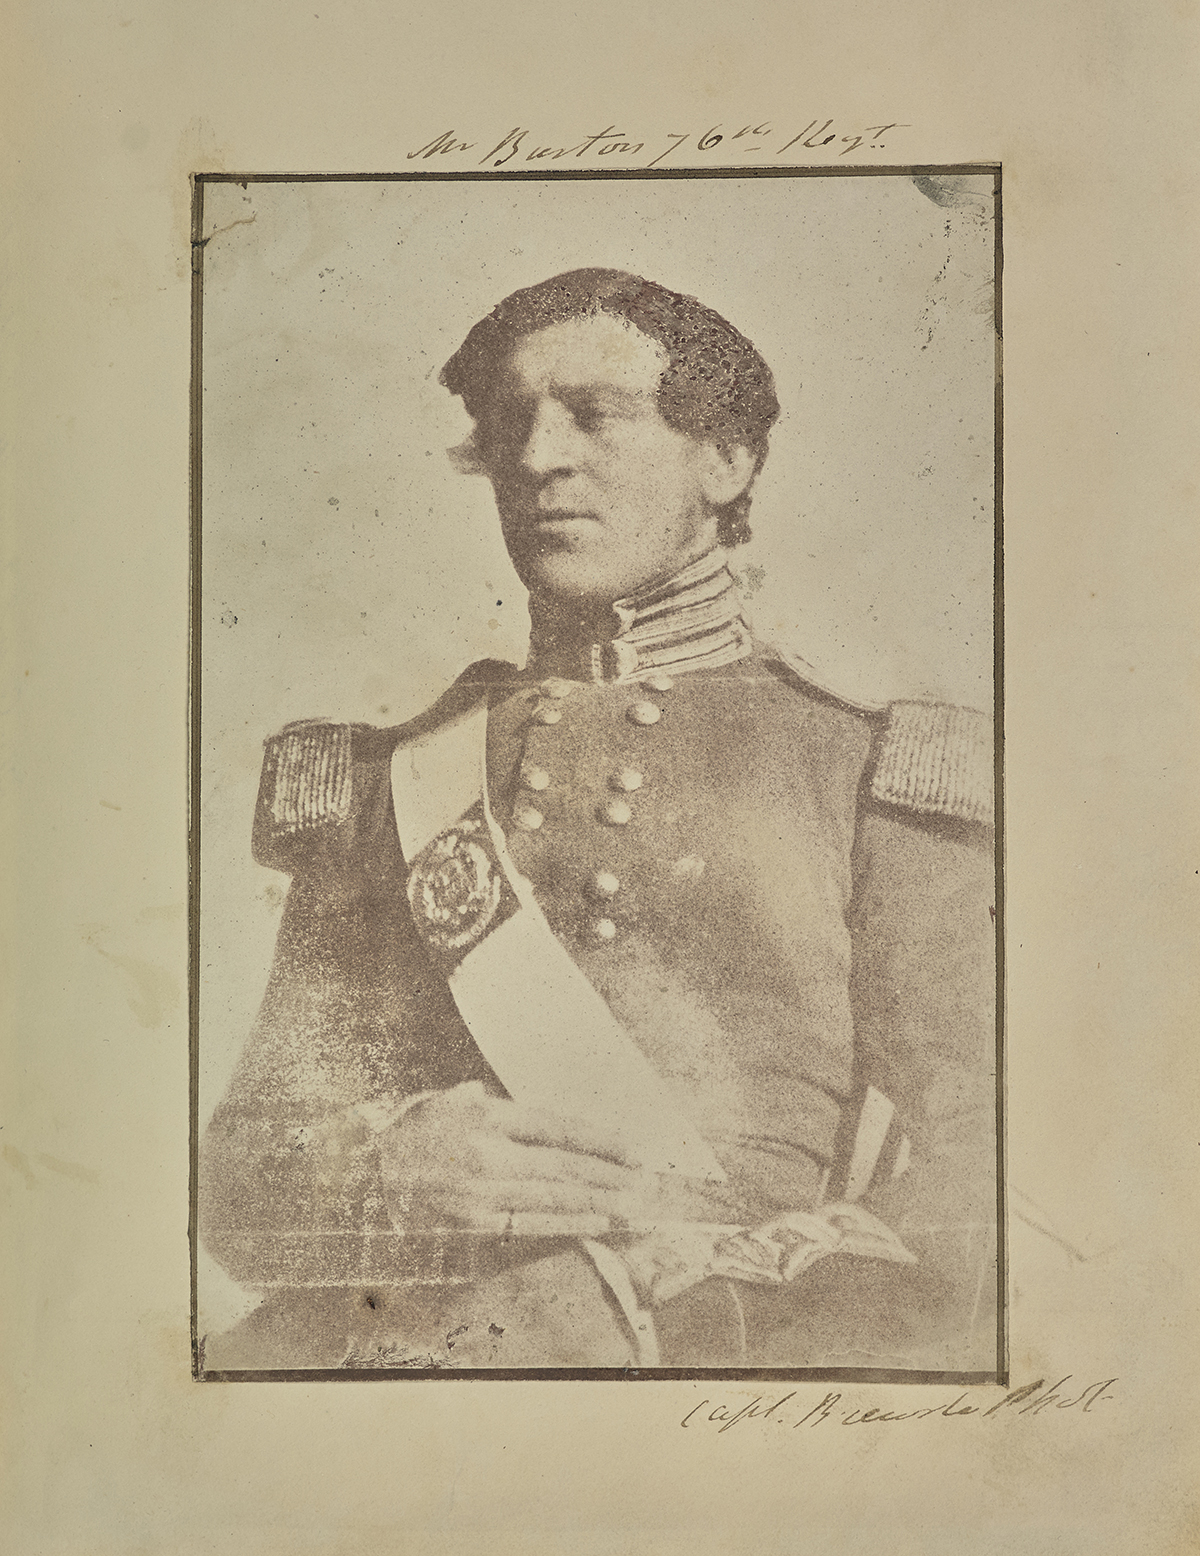 The earliest extant photographic portraits made in Ireland – Captain Henry Craigie Brewster’s portraits of fellow officers of the 76th Regiment